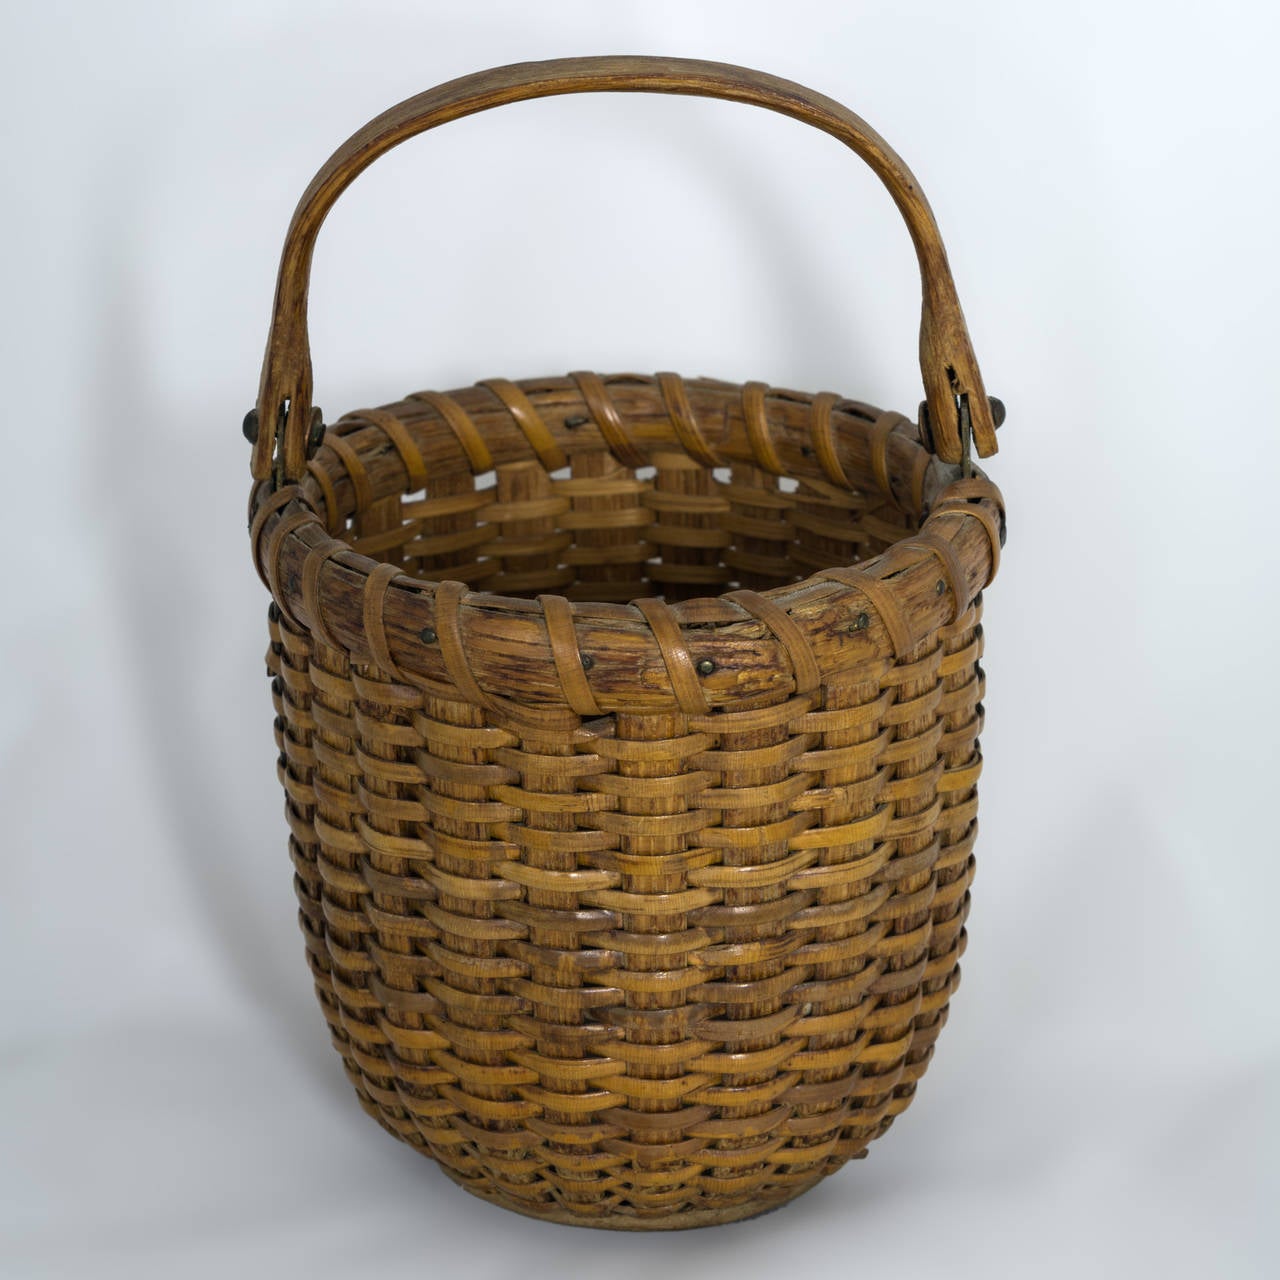 American Nantucket Lightship Basket Attributed to C. Mitchy Ray, circa 1940